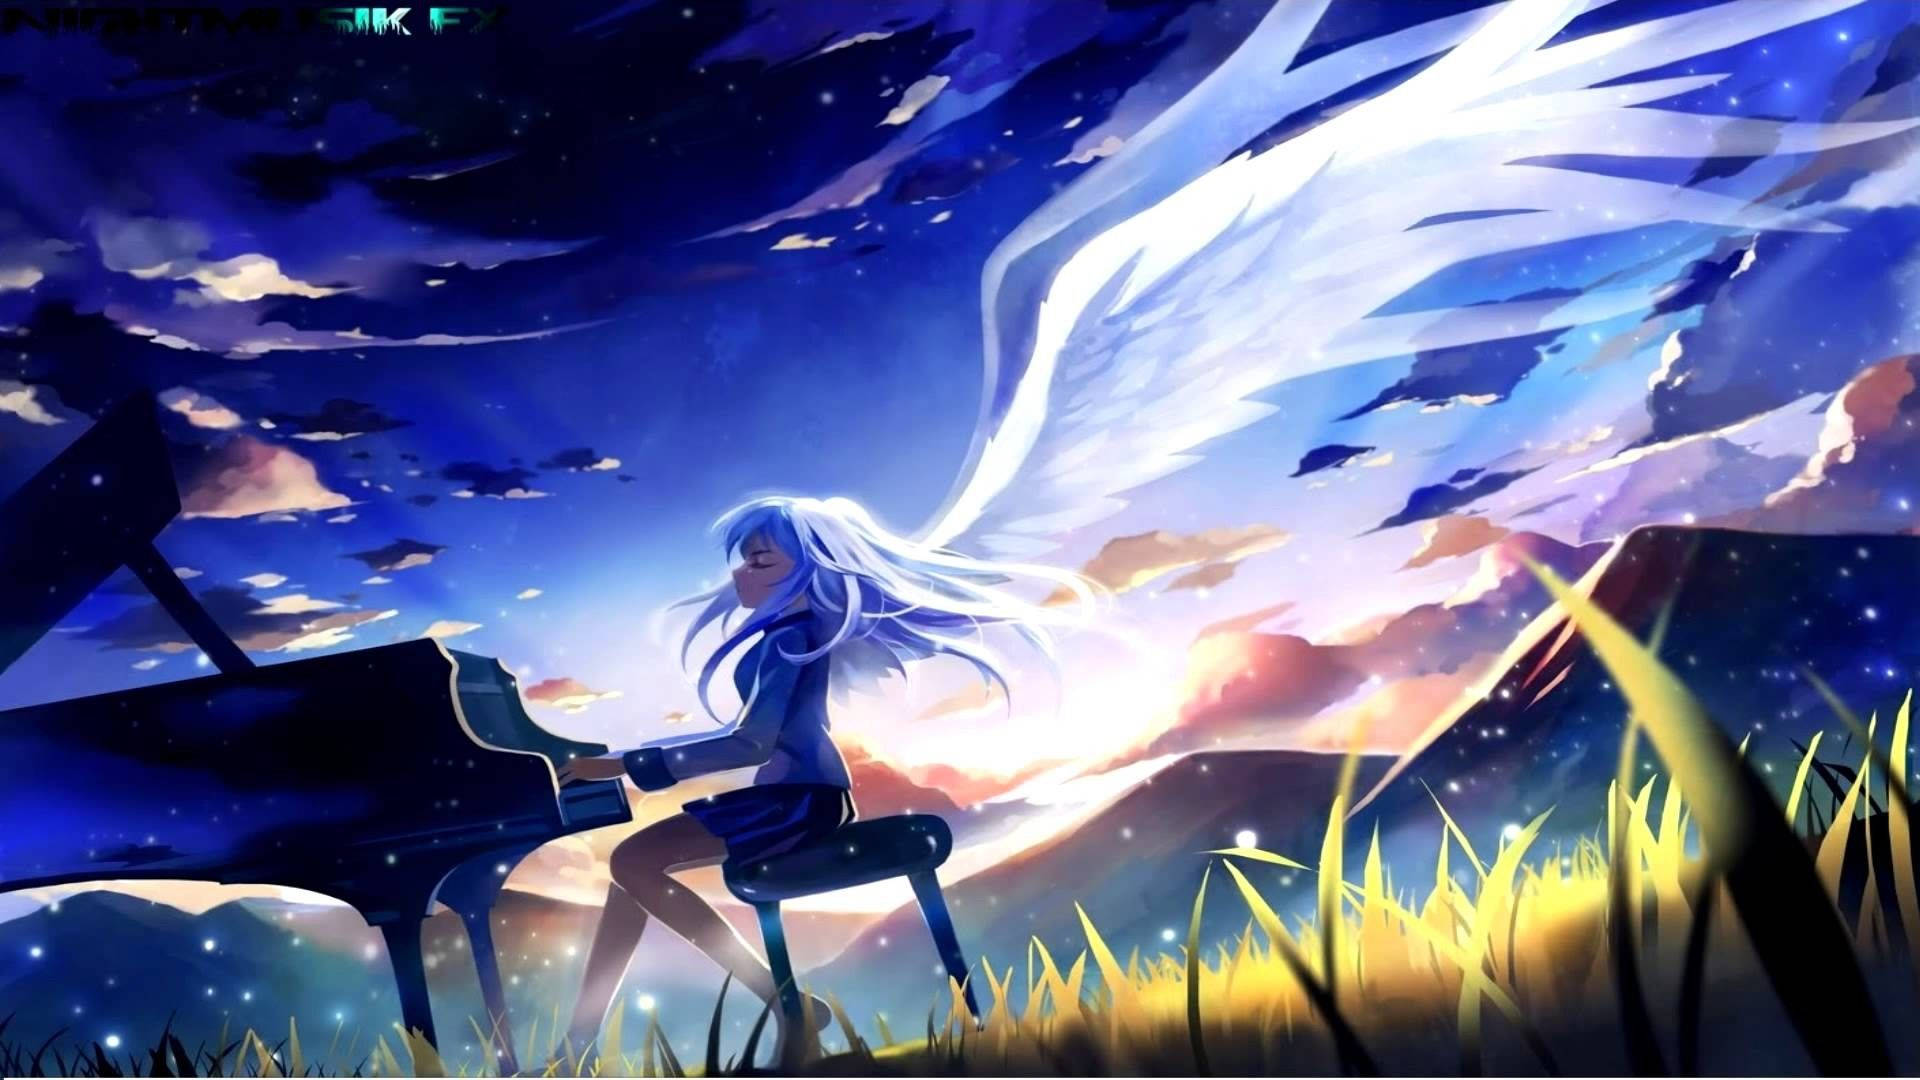 Cool Anime Girl With Wings Picture